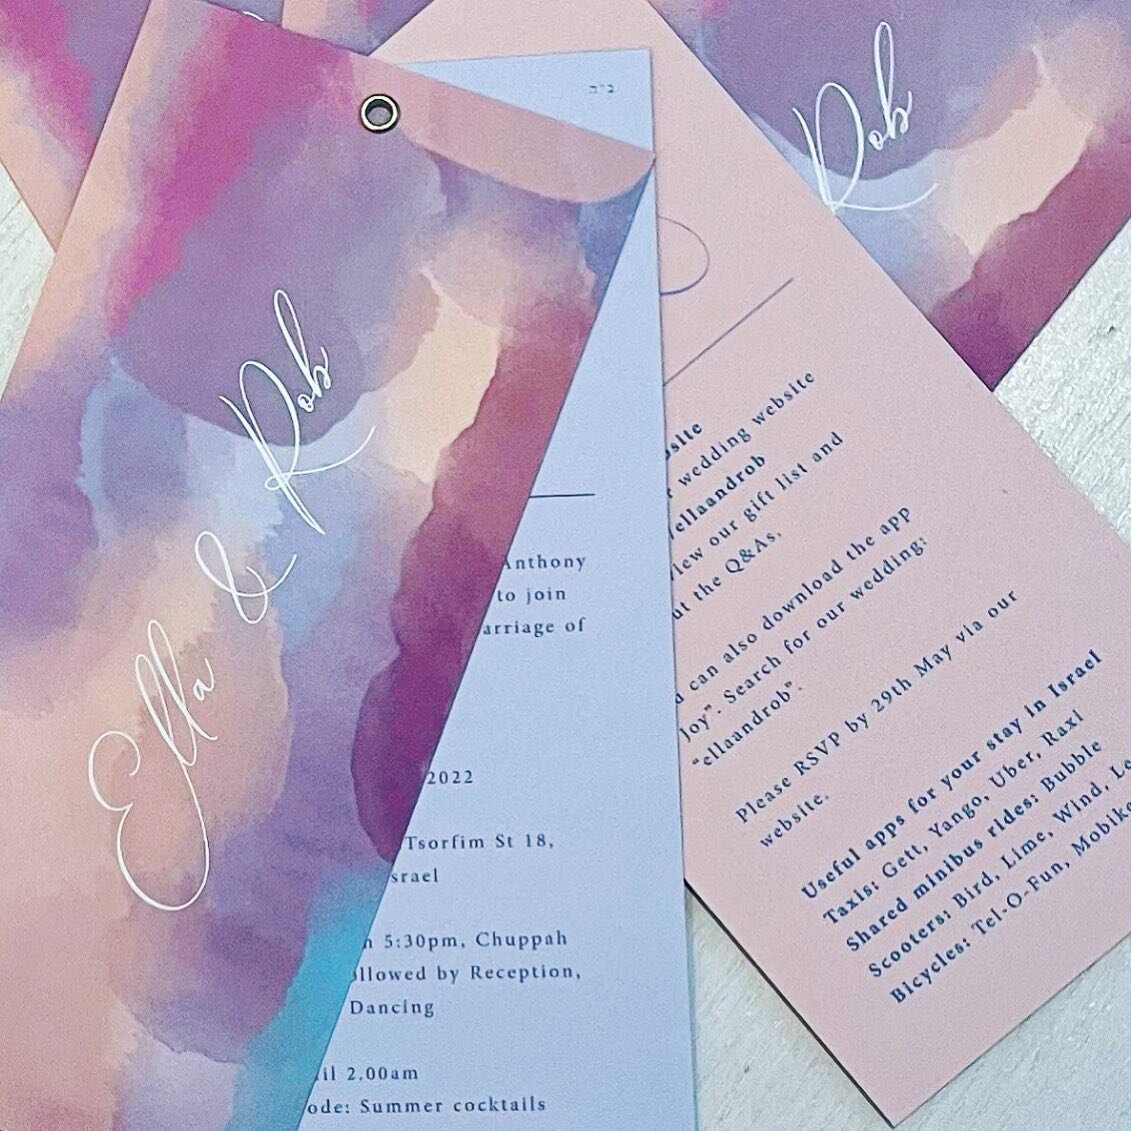 A watercolour bouquet 💐 Rumour has it these beauties are forming part of our semi-custom range&hellip; keep your eyes peeled 👀
.
.
.
#watercolourinvitations #floral #weddingflowers #weddinginvitation #stationerysuite #proudlyprinted #livandluc